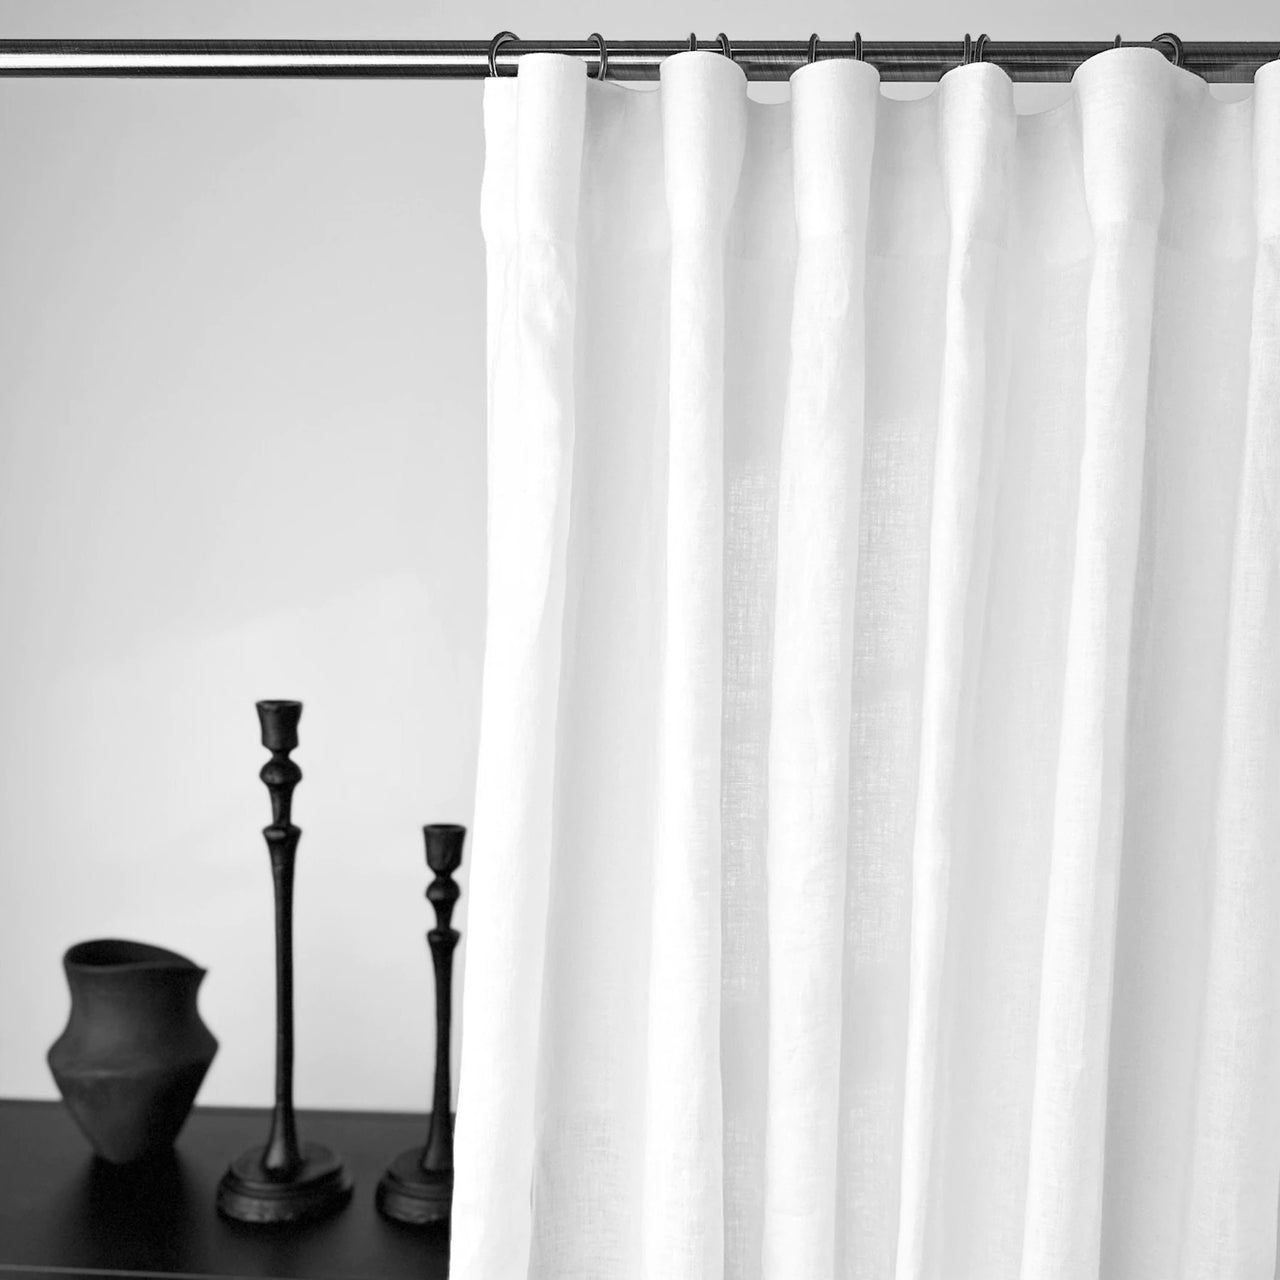 Pencil Pleat Linen Curtain Panel - Heading for Rings and Hooks - Unlined Linen Privacy Curtain